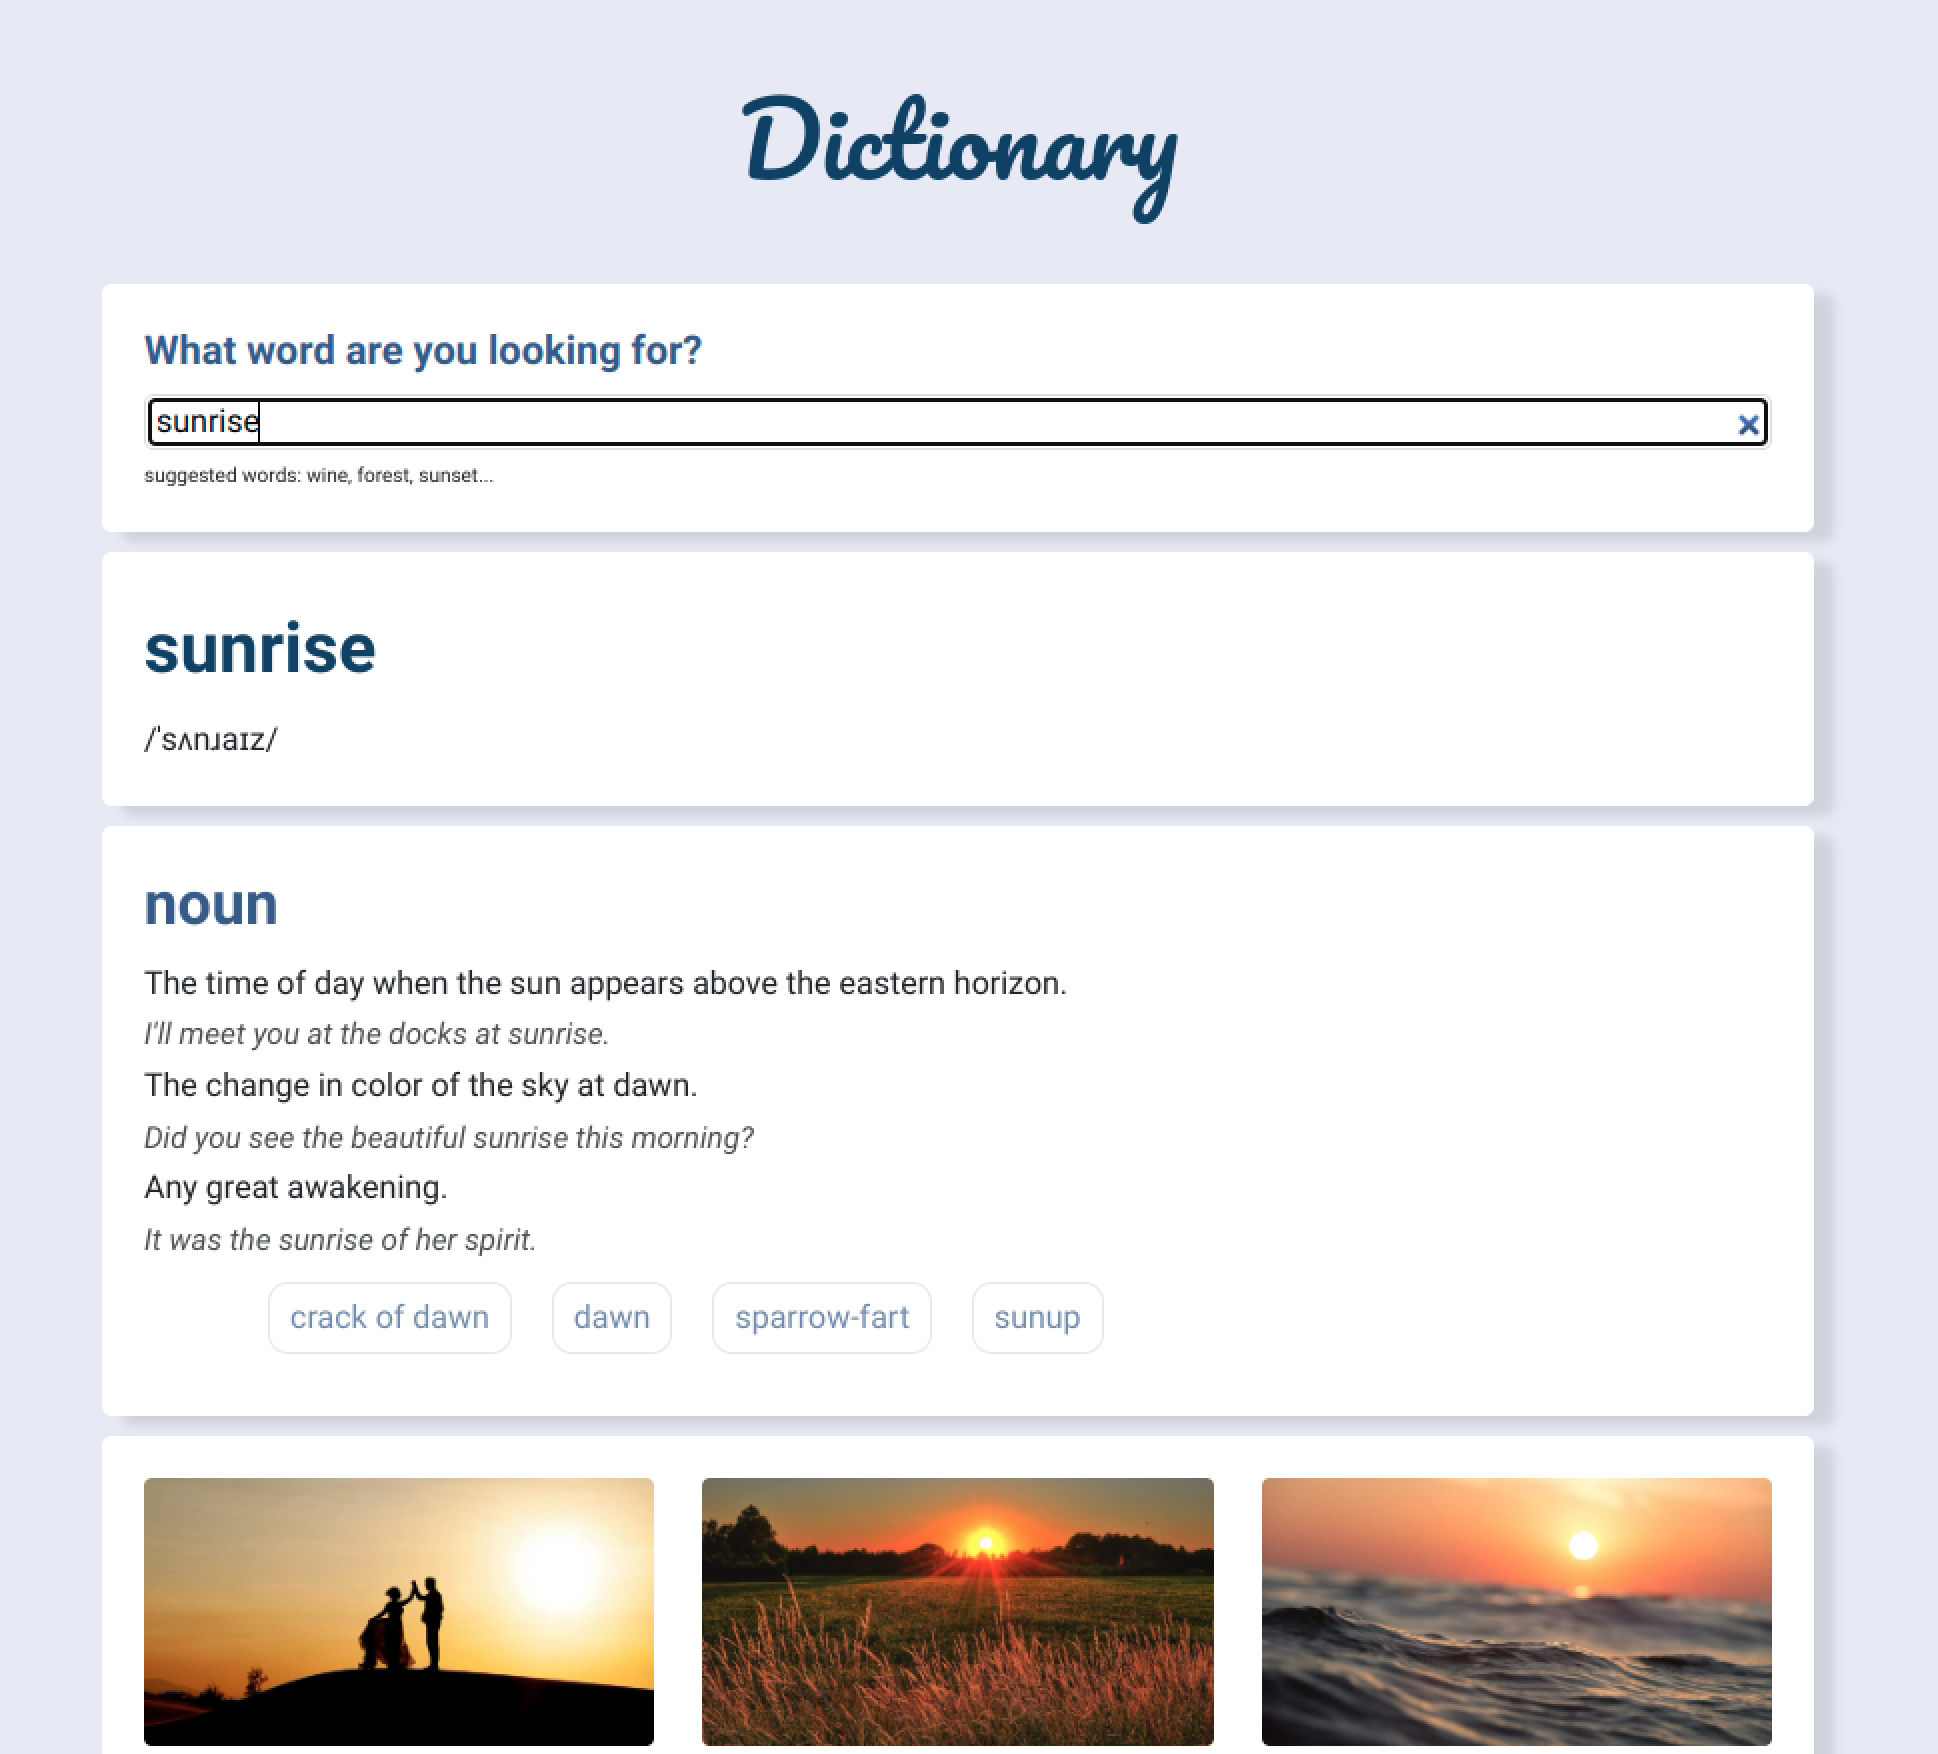 dictionary project